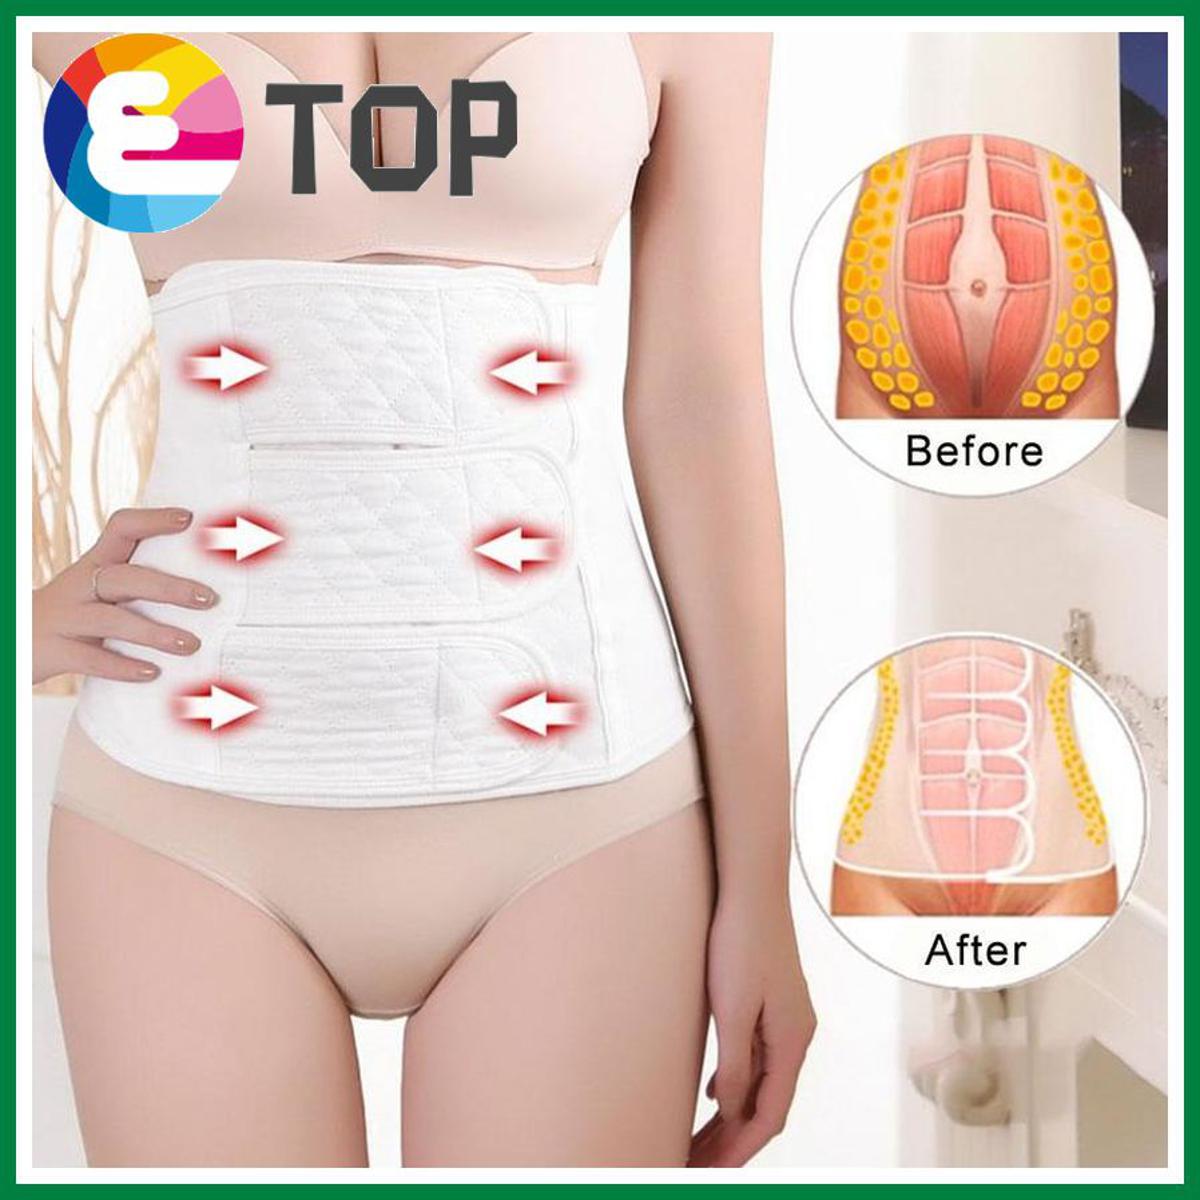 ETOP】 Post C-Section Recovery Belly Band Wrap Abdominal Binder